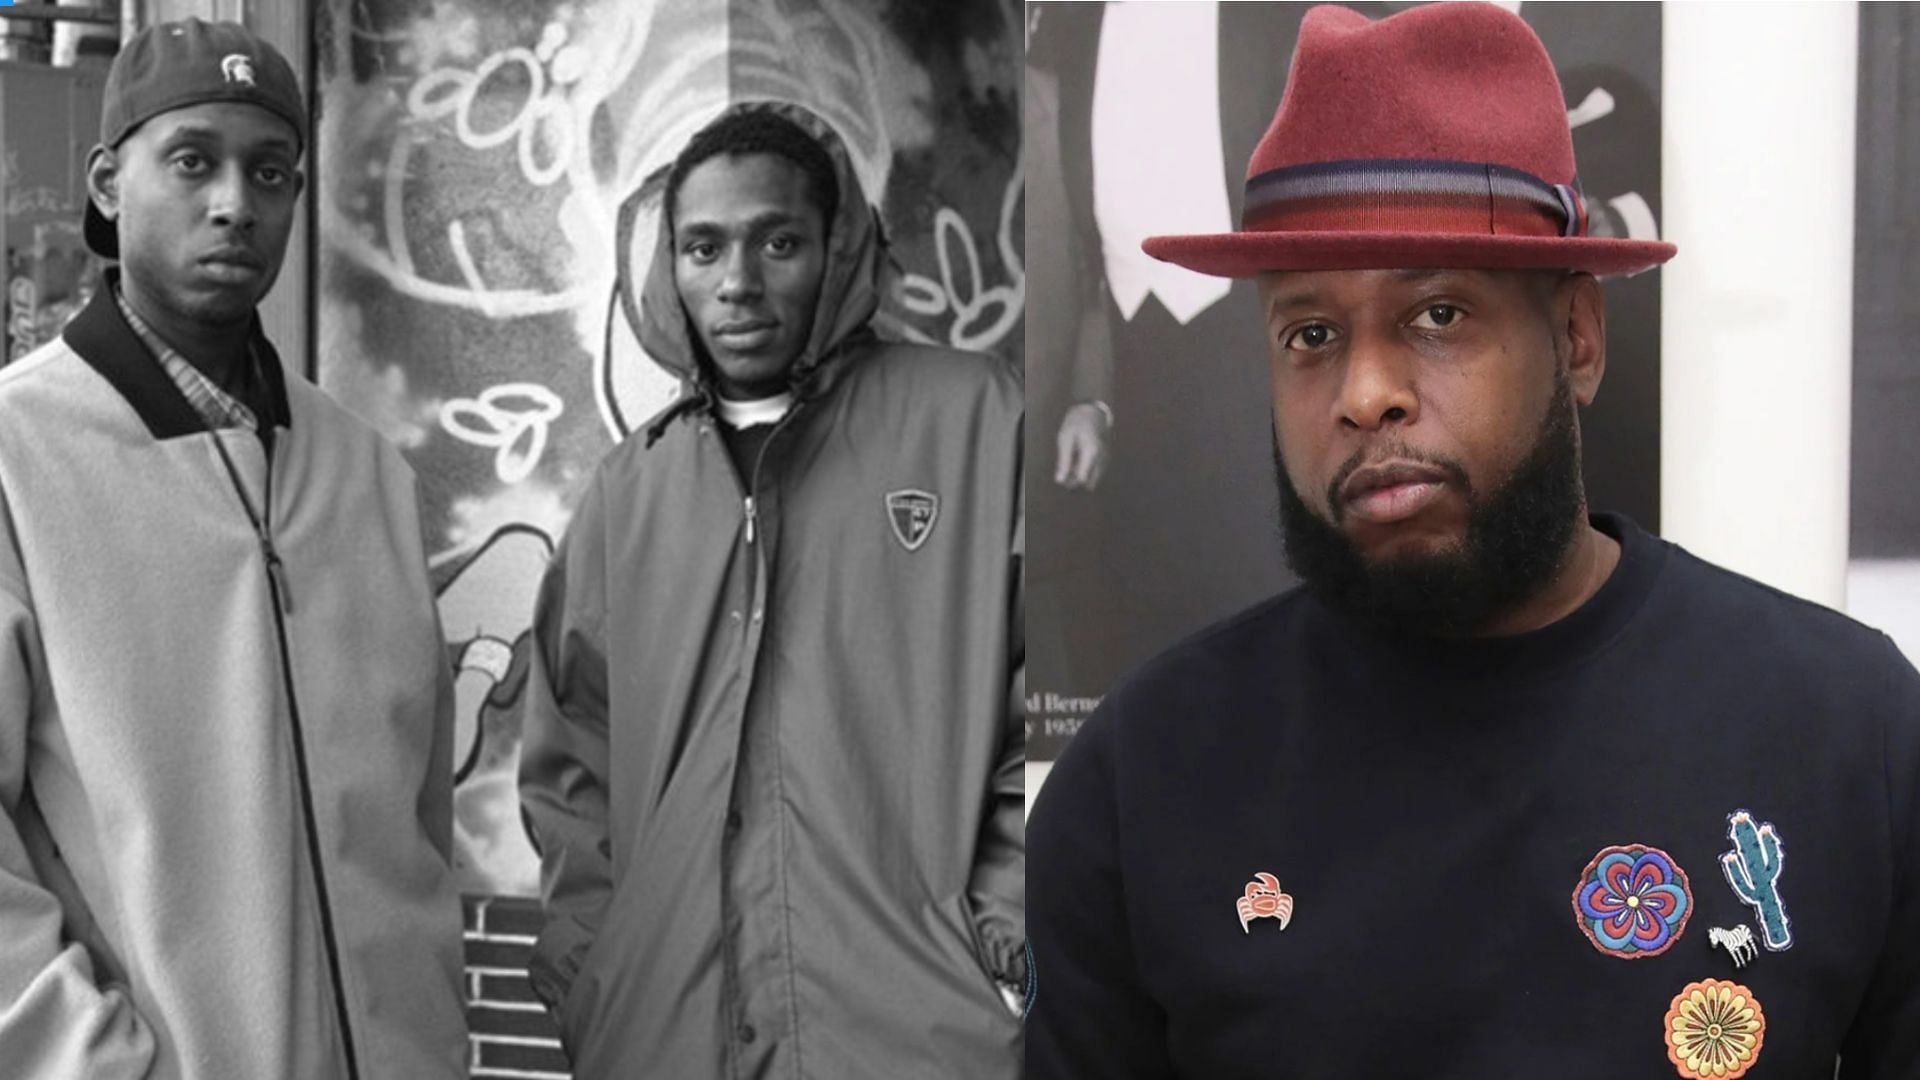 Black Star hip-hop duo Yasiin Bey and Talib Kweli have reunited to release their new and second full-length album No Fear of Time. (Images via Twitter/@Footaction and Cindy Ord / Getty Images)